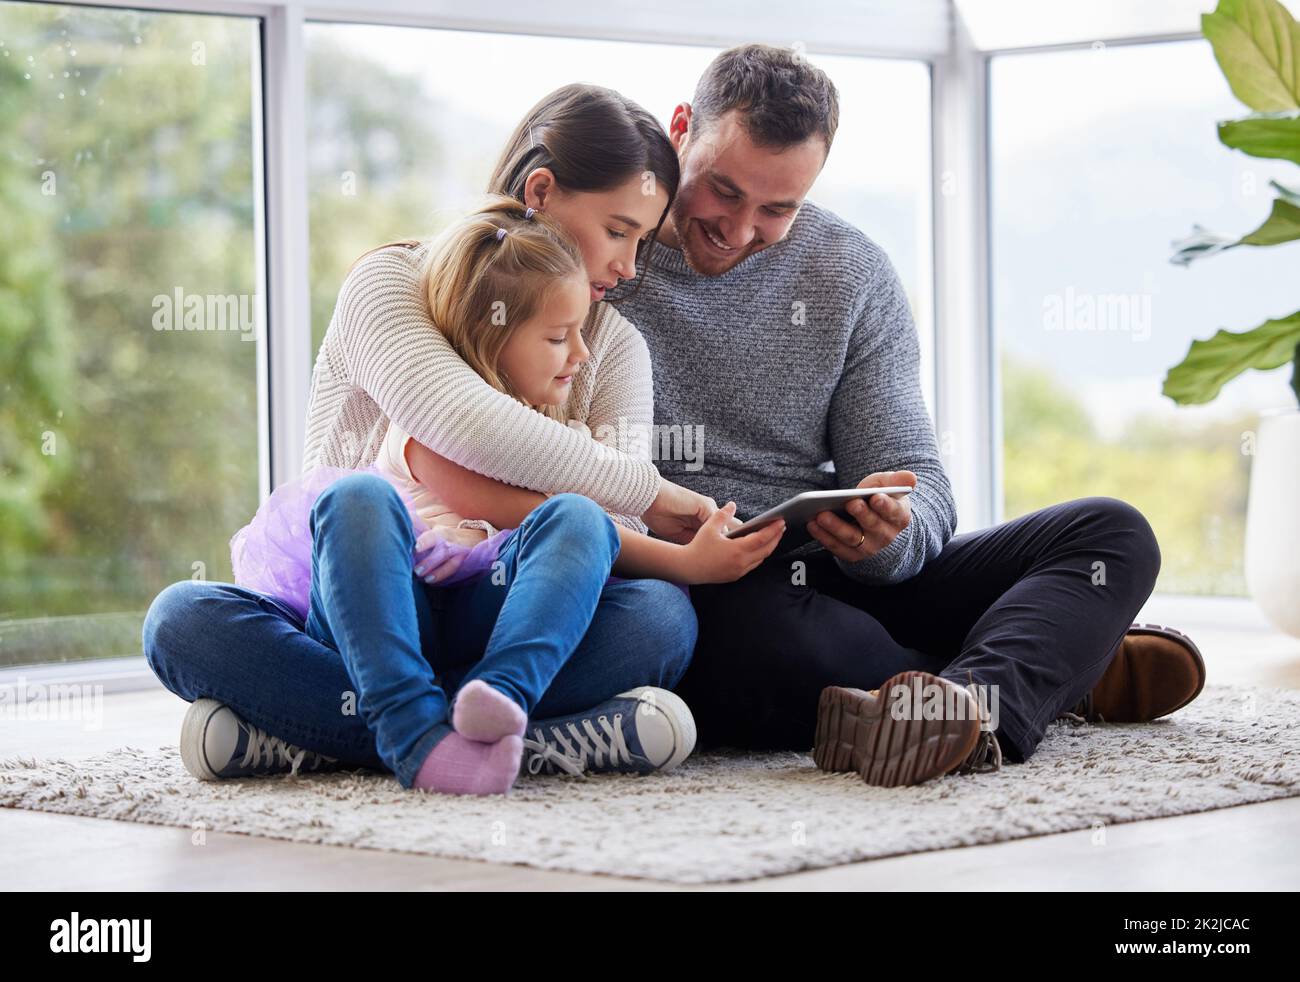 Happiness personified. Shot of a young family using a digital tablet at home. Stock Photo